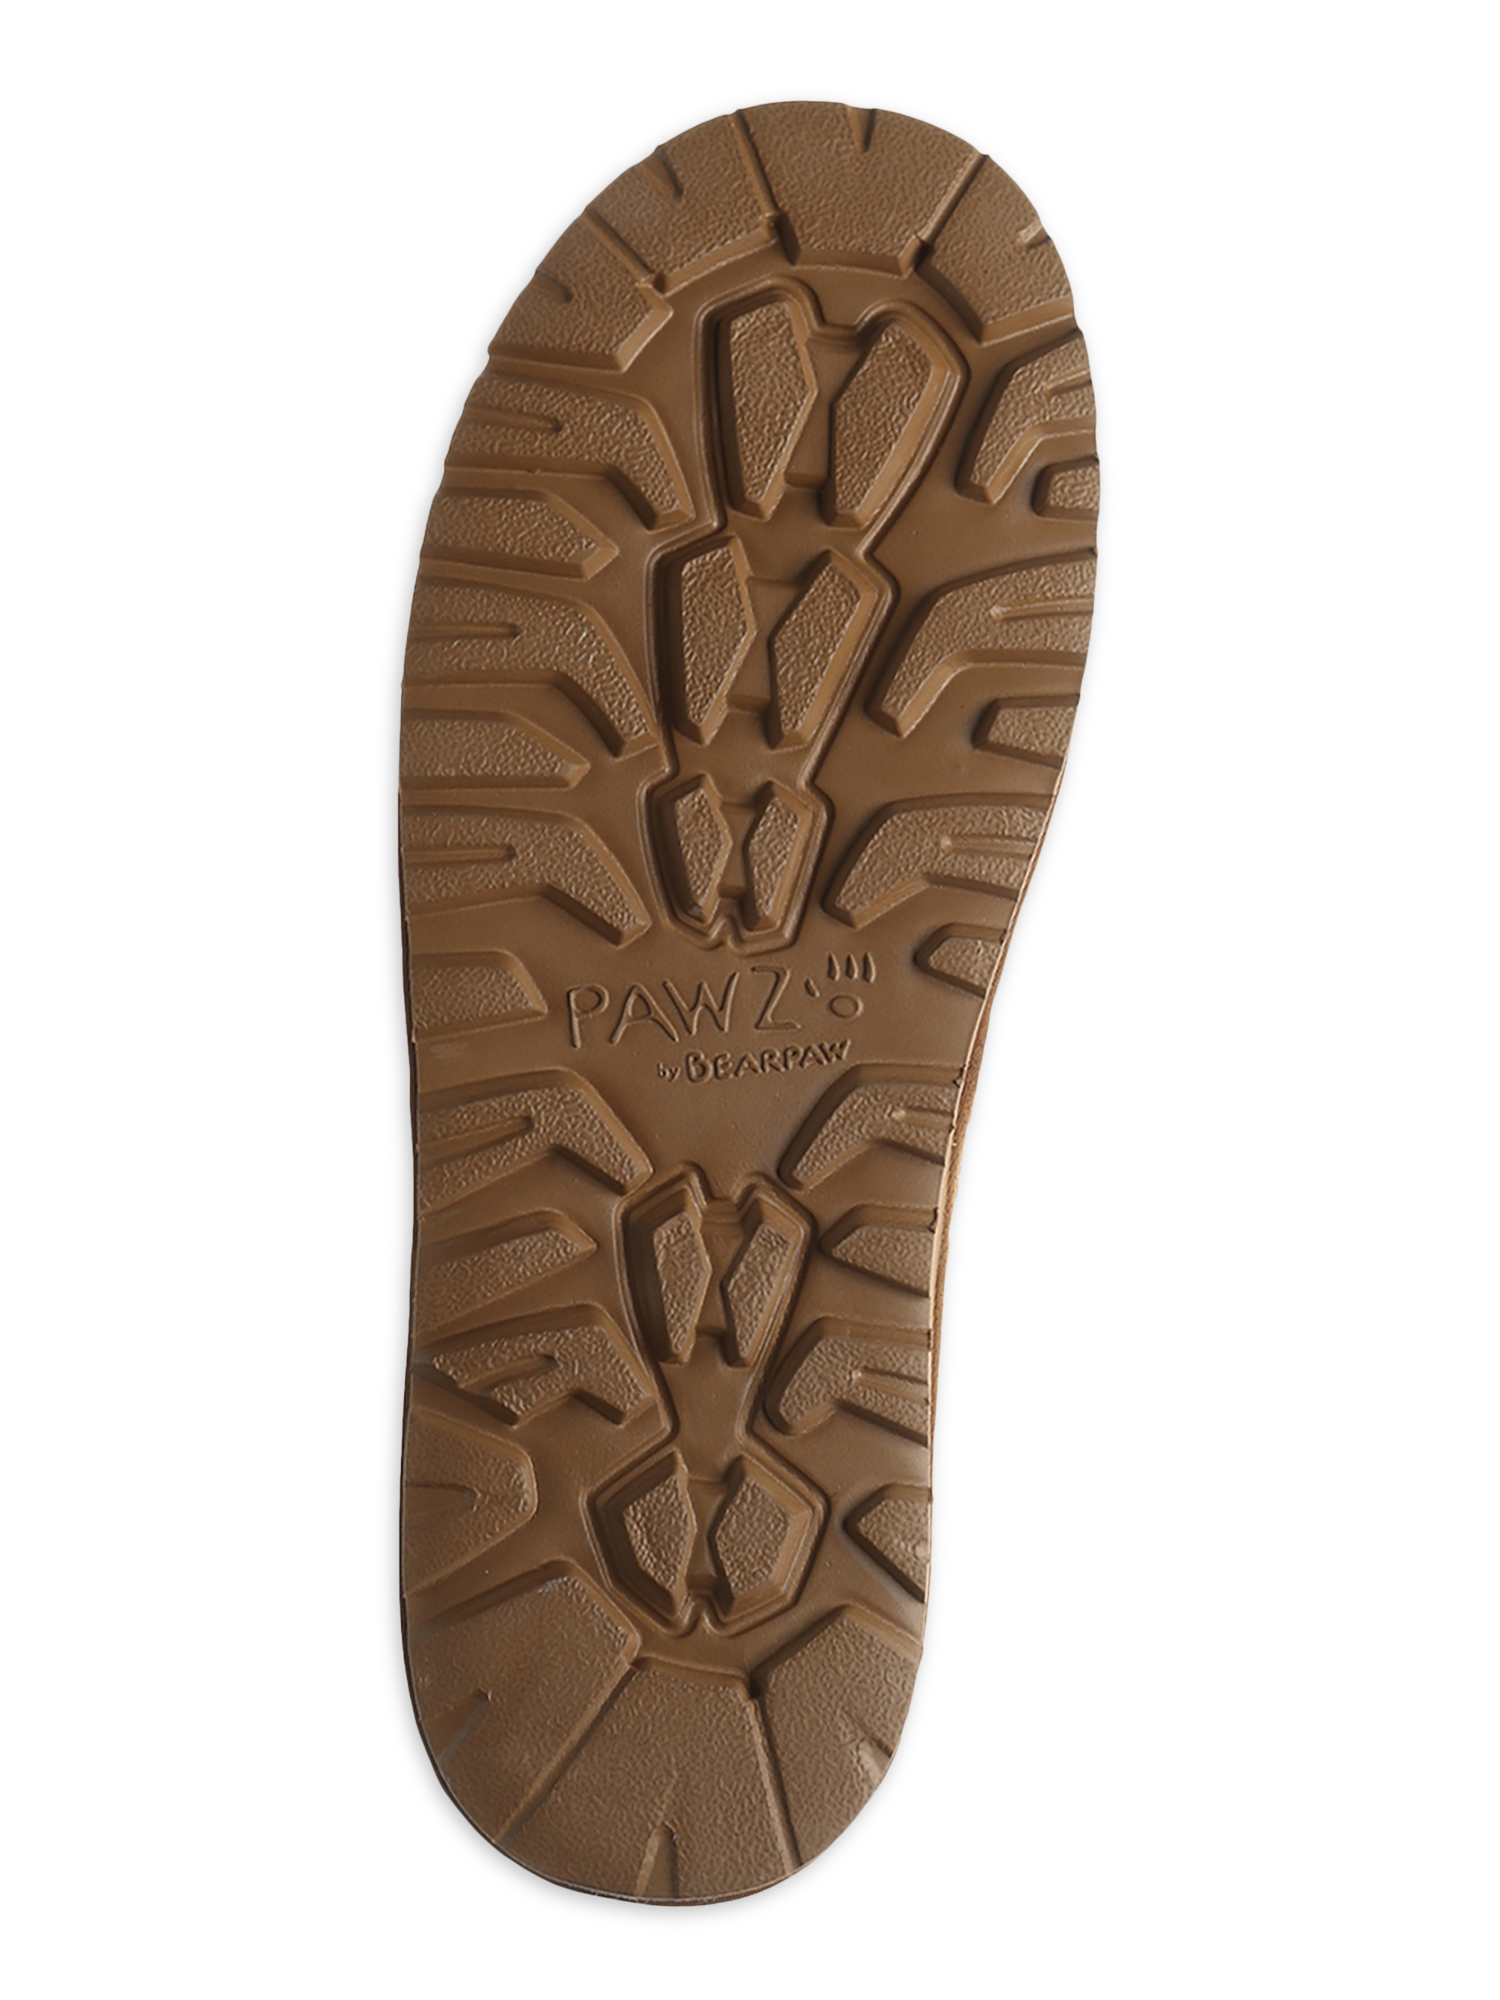 Pawz by Bearpaw Men's Genuine Suede Kevin Slipper Clogs - image 5 of 5